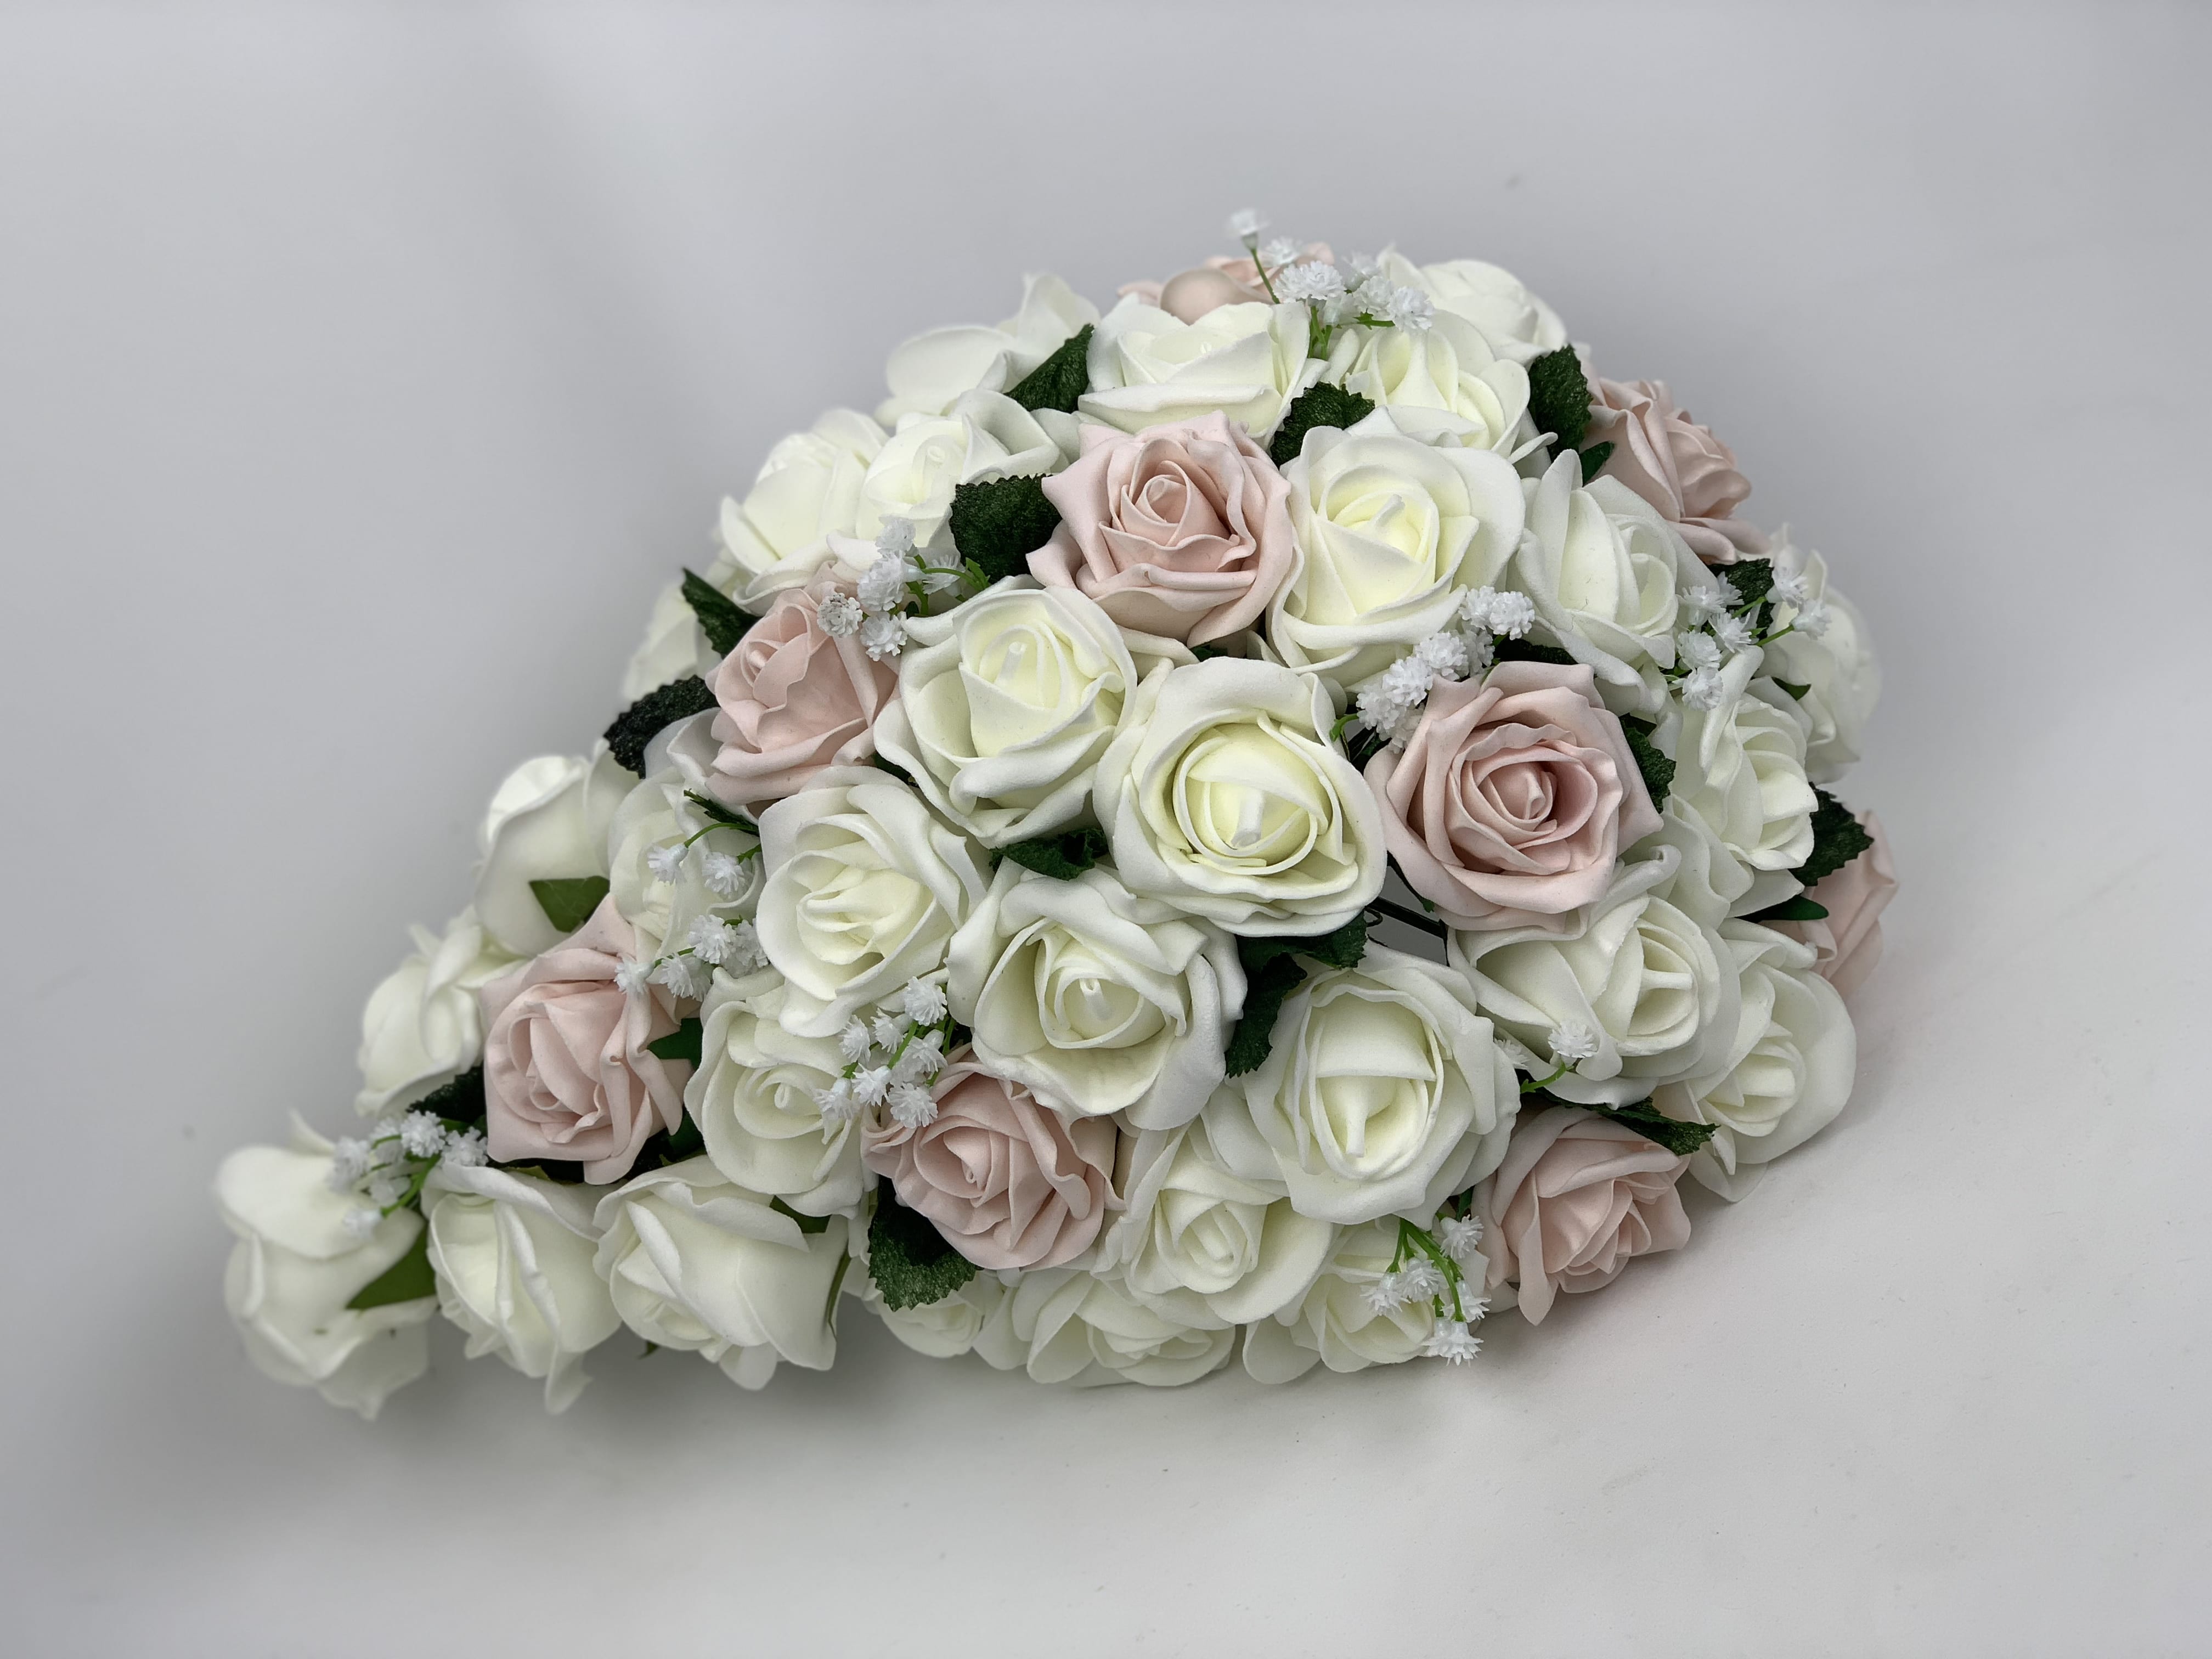 Wedding Flowers Ivory & yellow roses with diamante BRIDES TEARDROP BOUQUET 